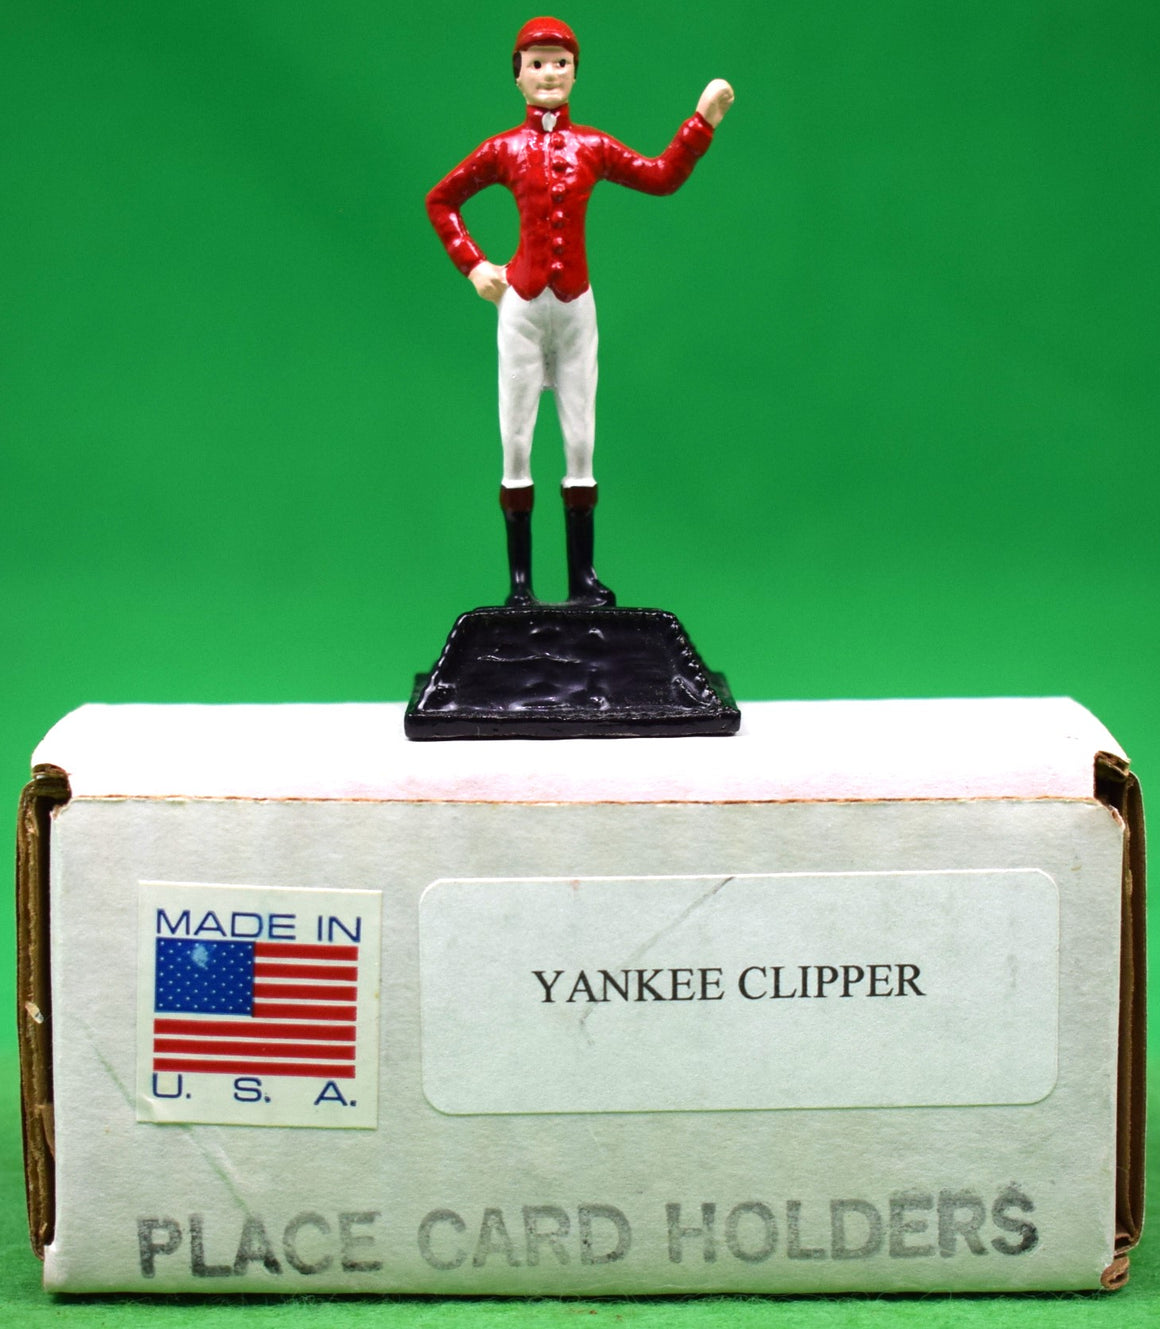 "Red "21' Club Jockey Dinner Place Card Holder" (New In Box) (SOLD)